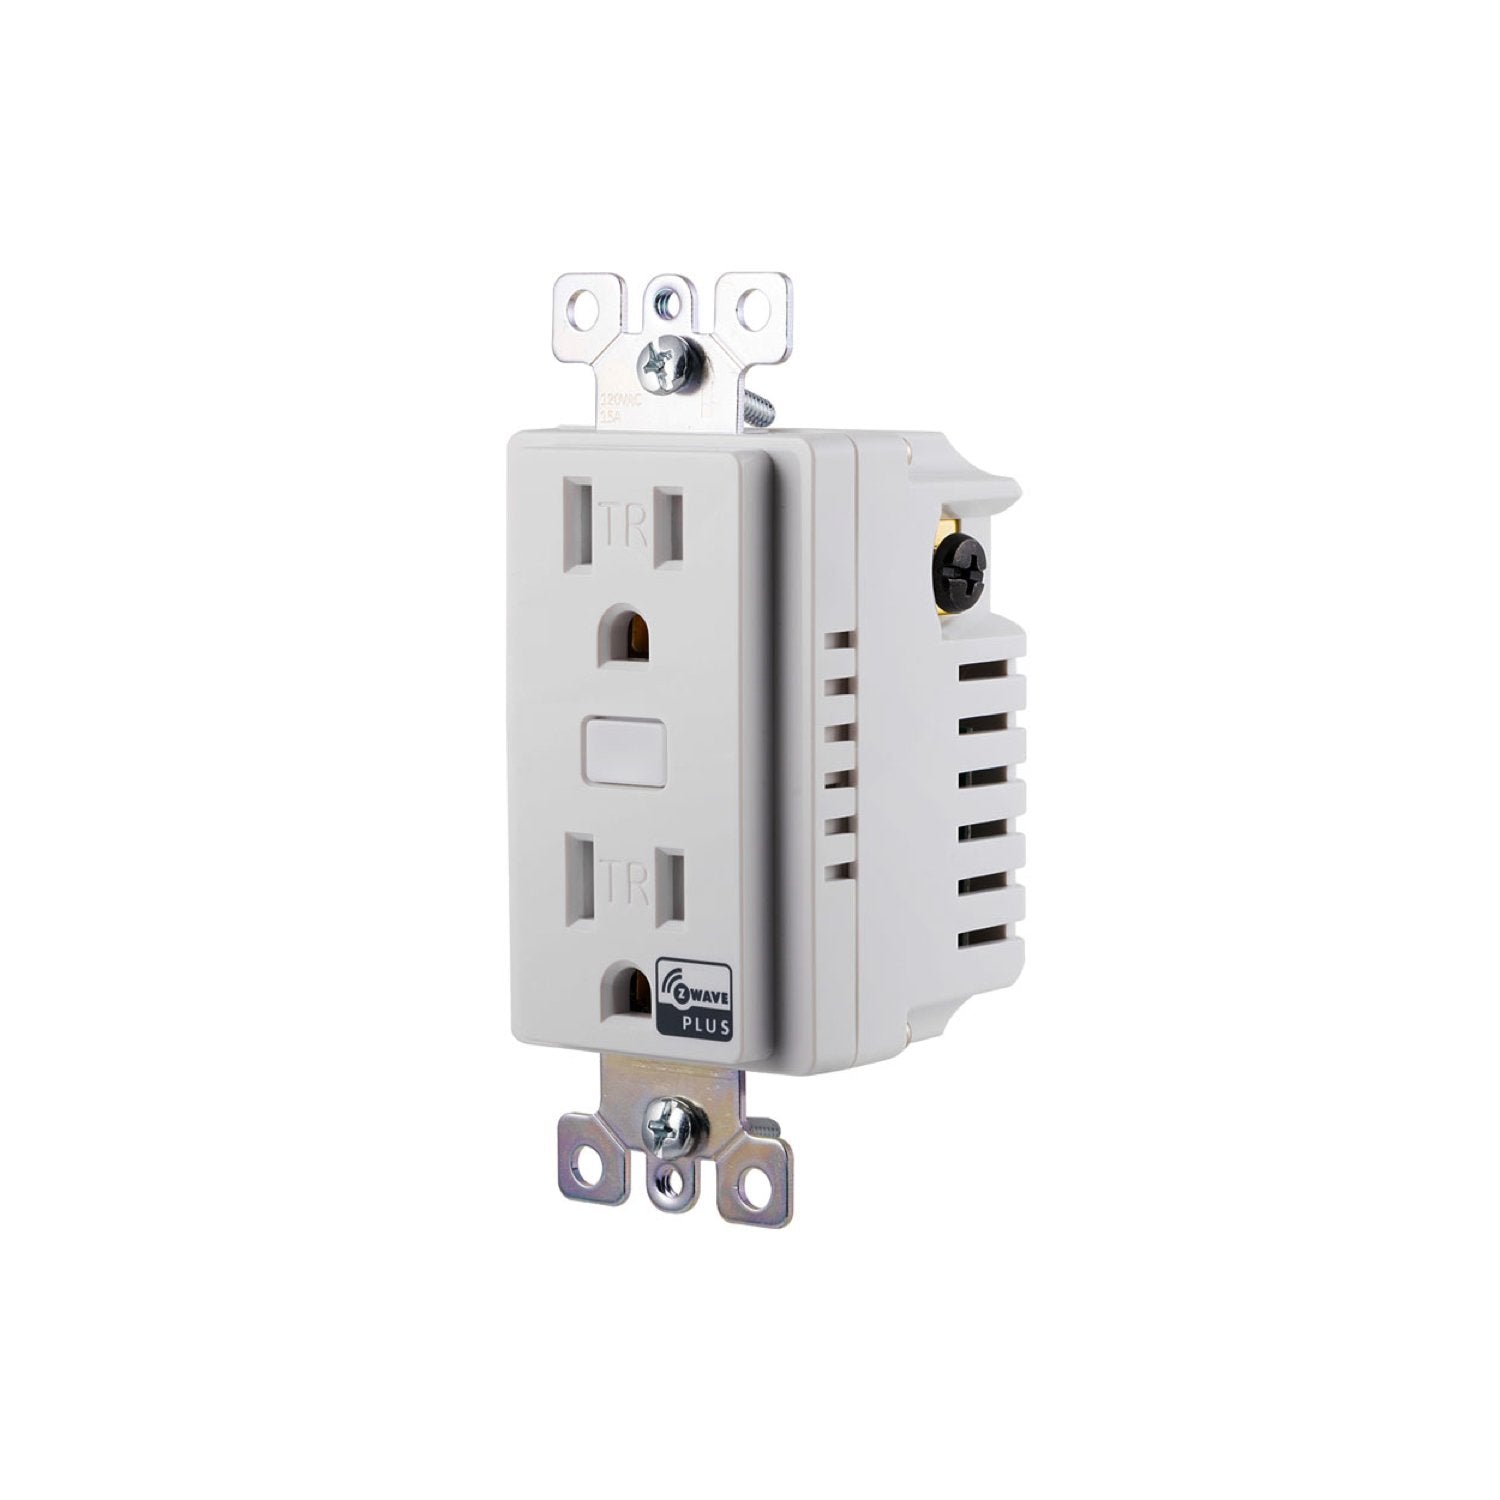 GE In-Wall Smart Outlet (for Works with Ring Alarm Security System) - White